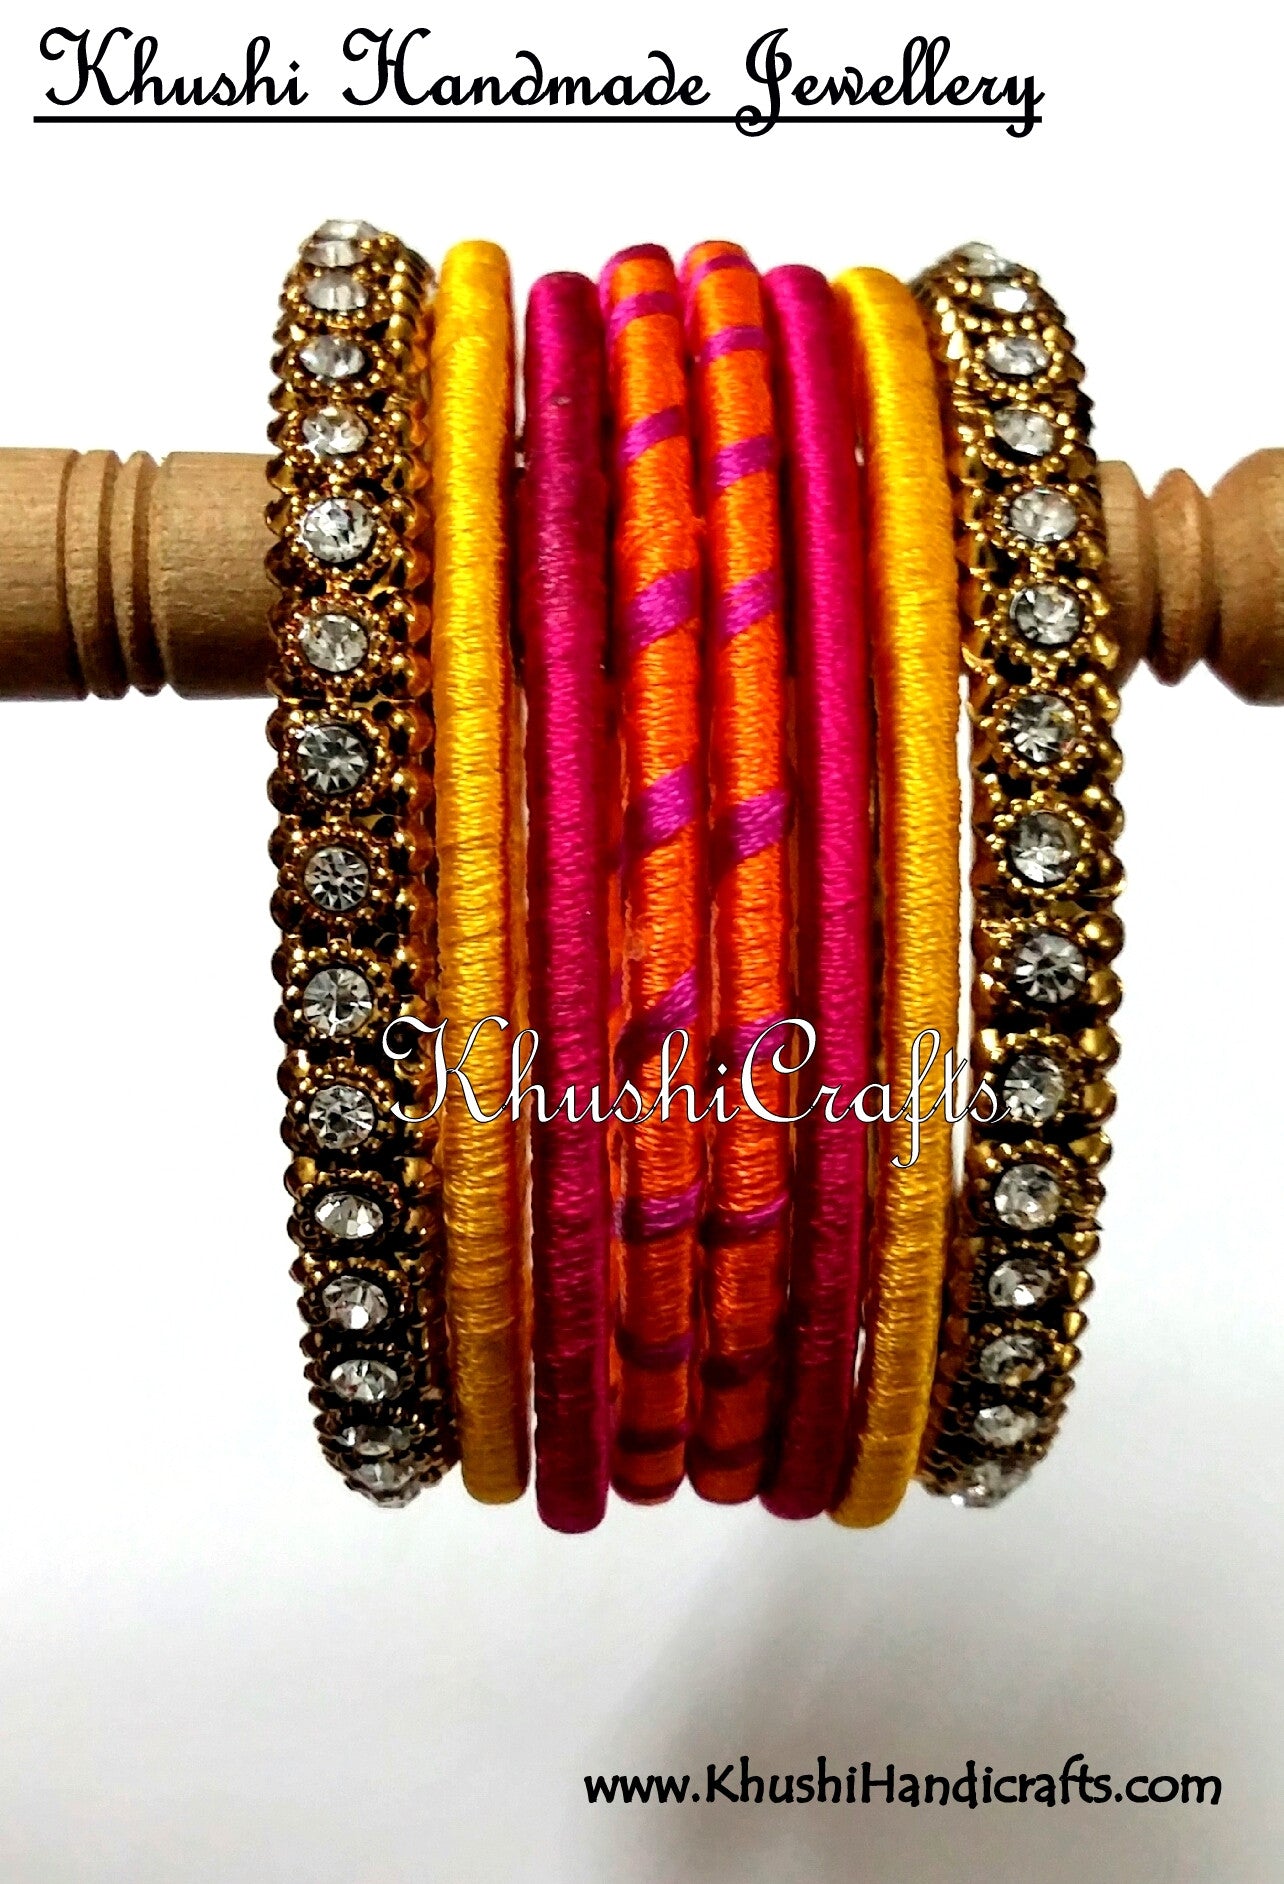 Hand-crafted Silk Thread Bangles in Orange Pink and Yellow - Khushi Handmade Jewellery